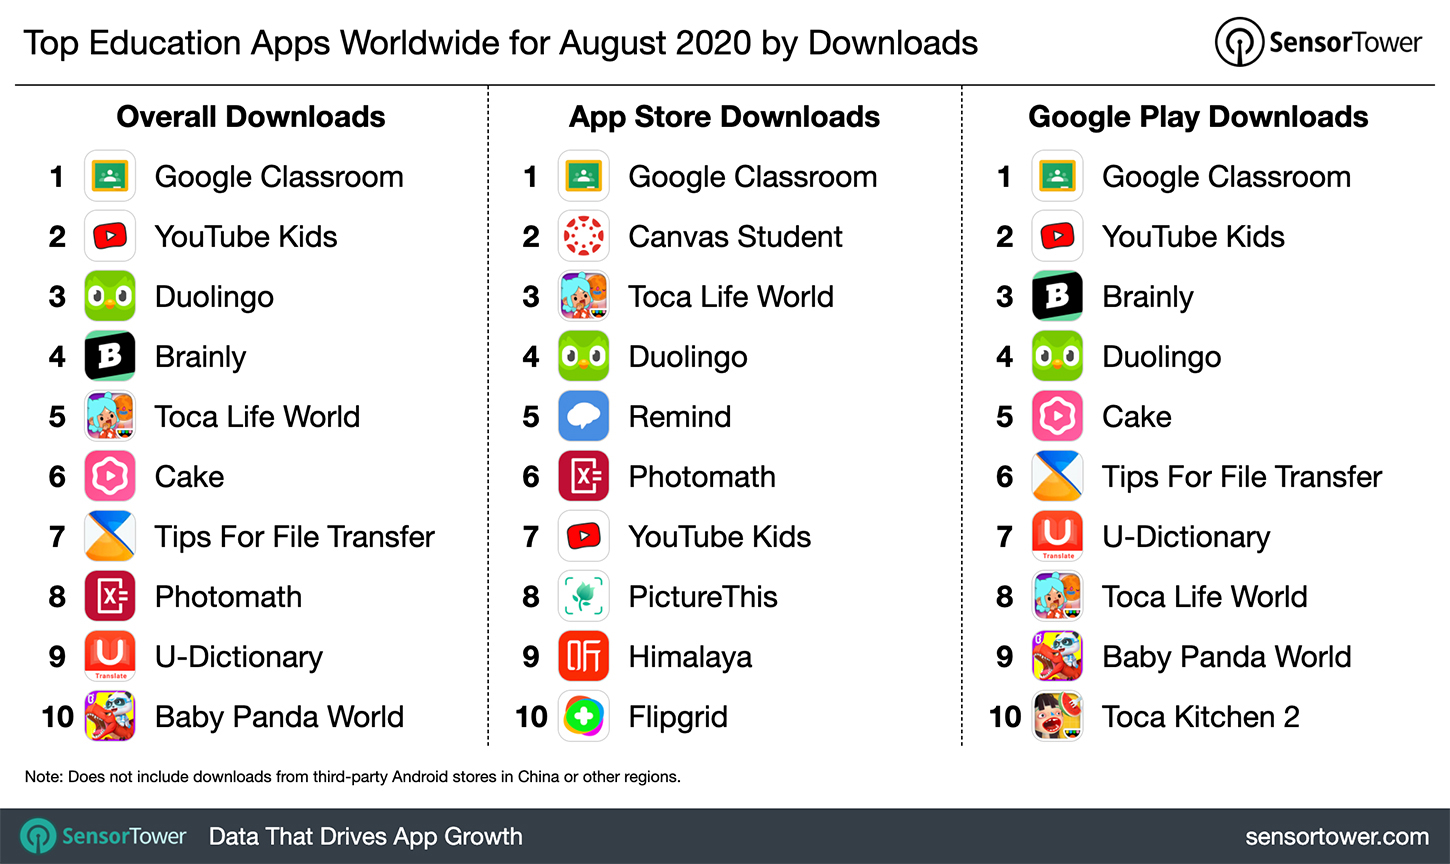 Top Education category Apps Worldwide for August 2020 by Downloads